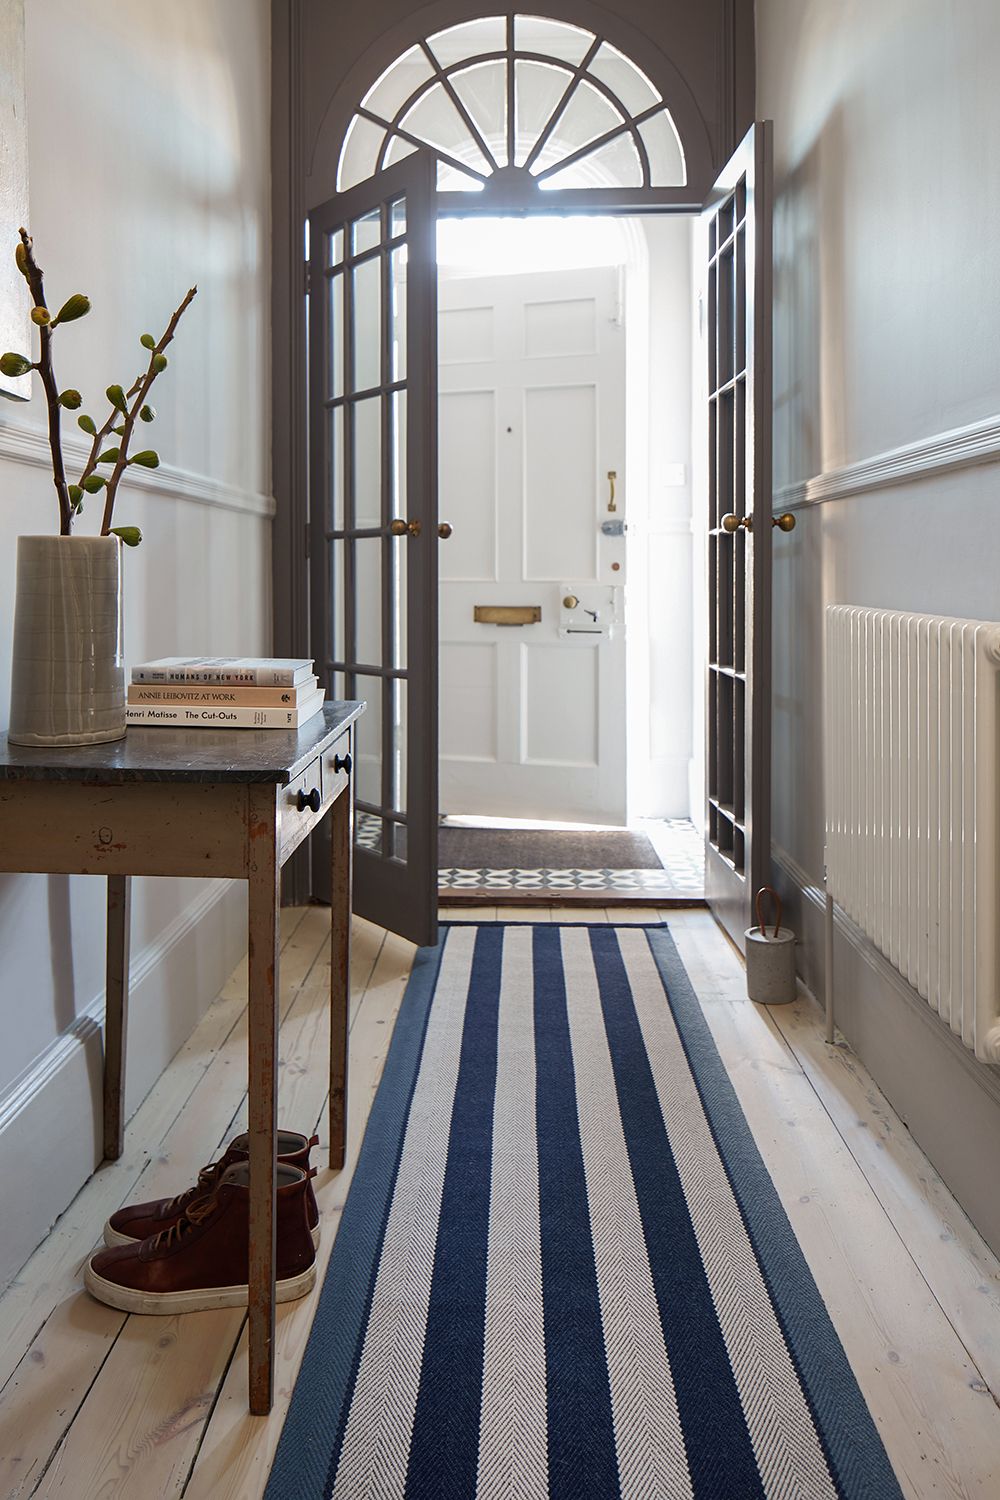 Hallway Rugs 10 Ideas To Add Style, Best Jute Rugs For Entryway